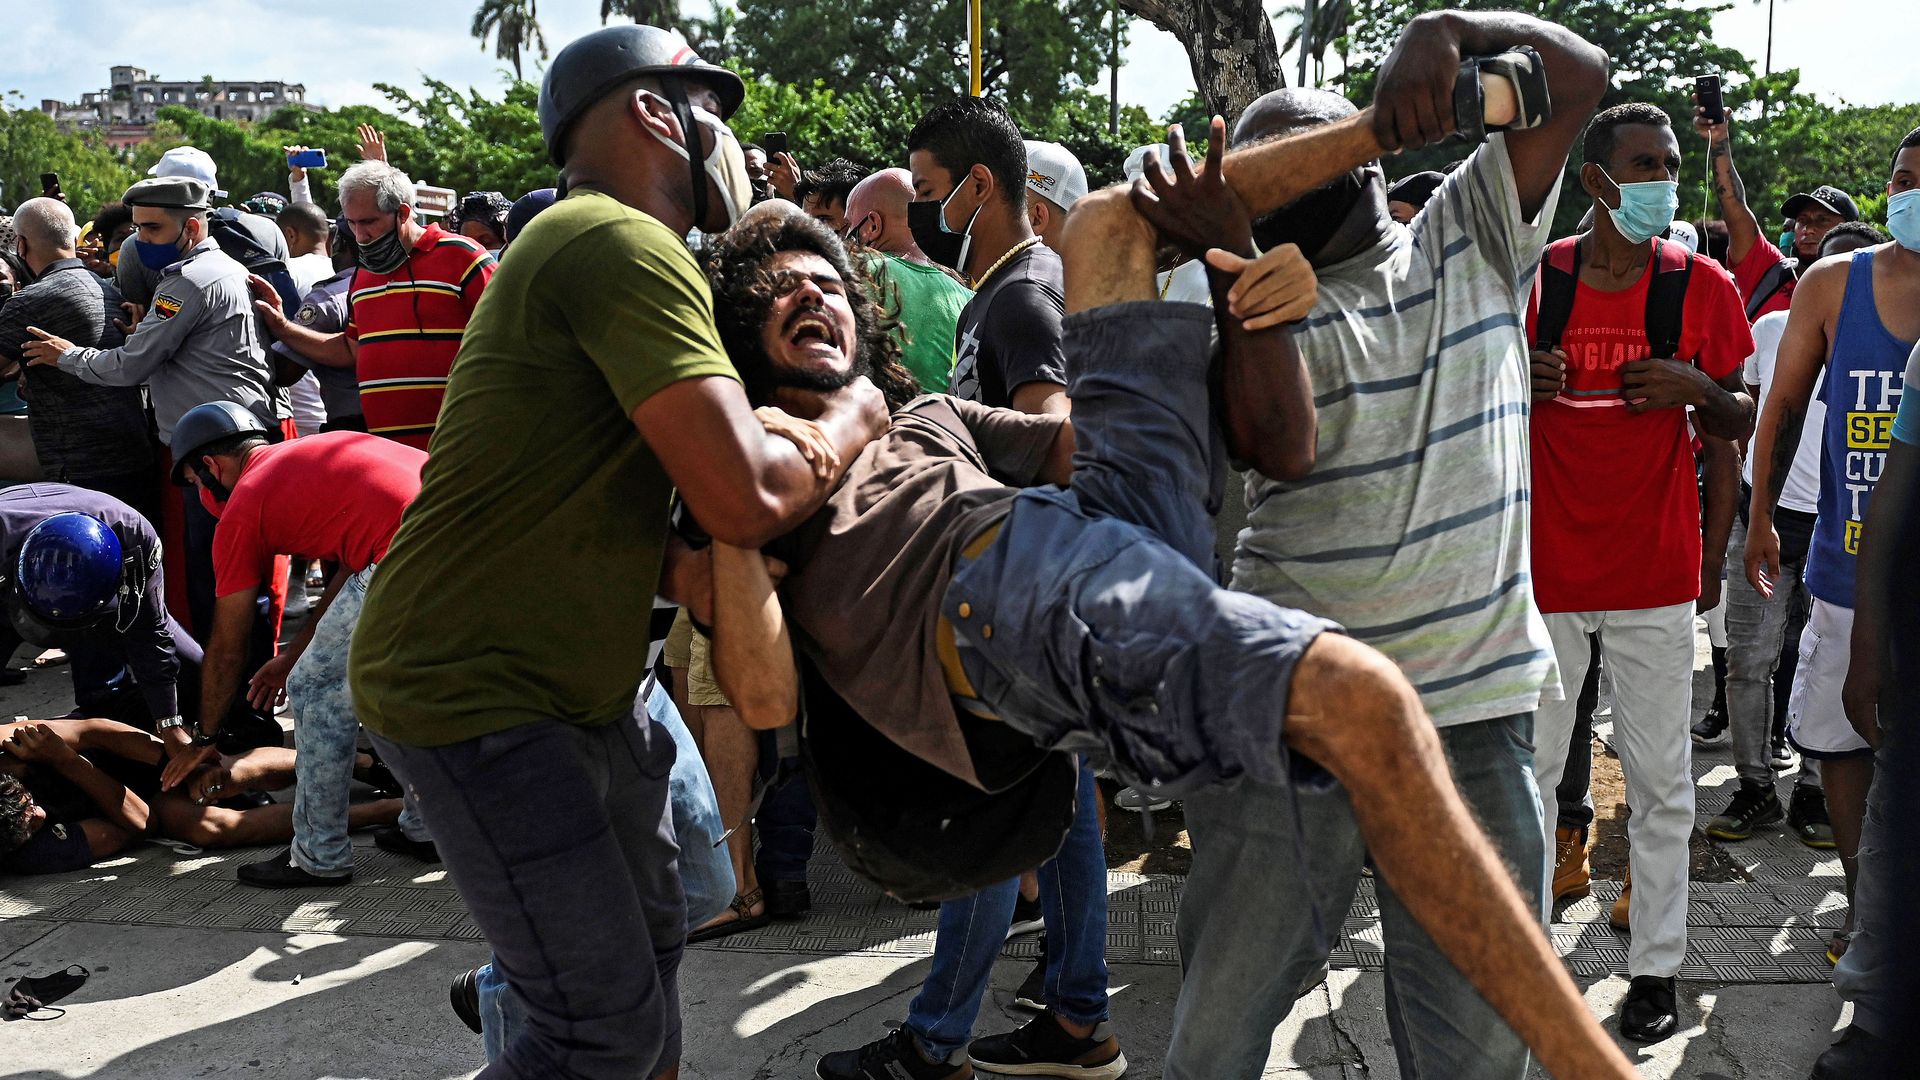 A young protester is arrested in Havana on July 11, 2021.